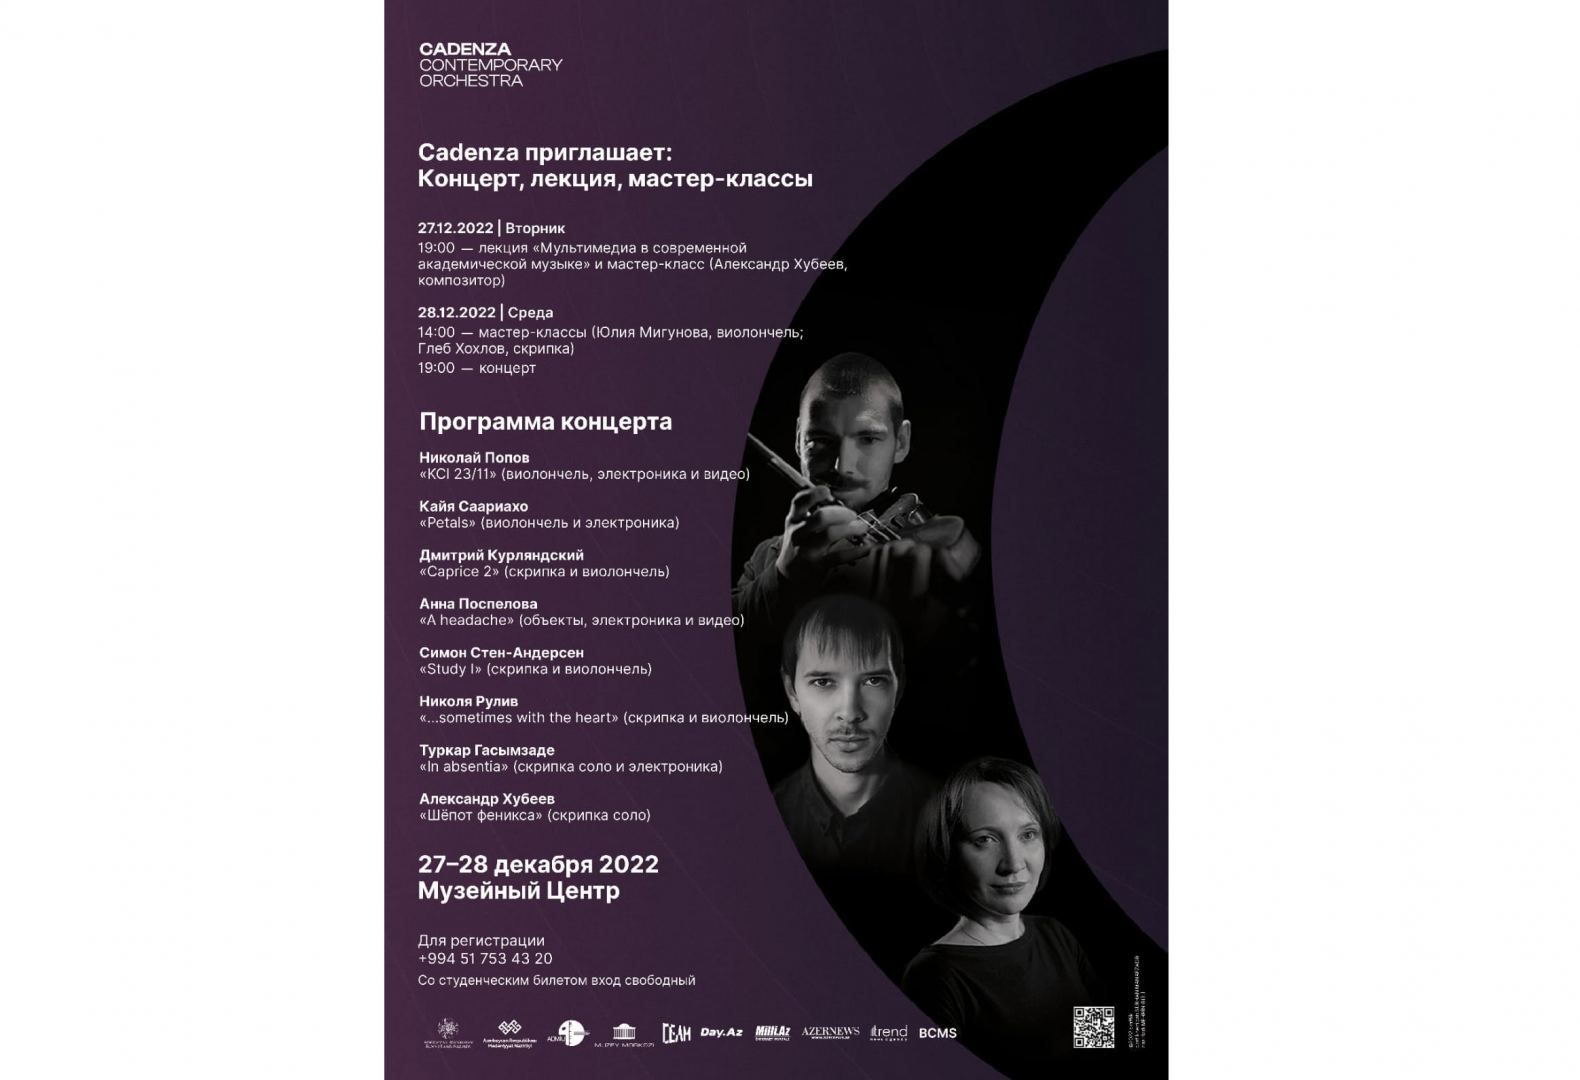 Cadenza Orchestra to perform electro-acoustic music in Baku